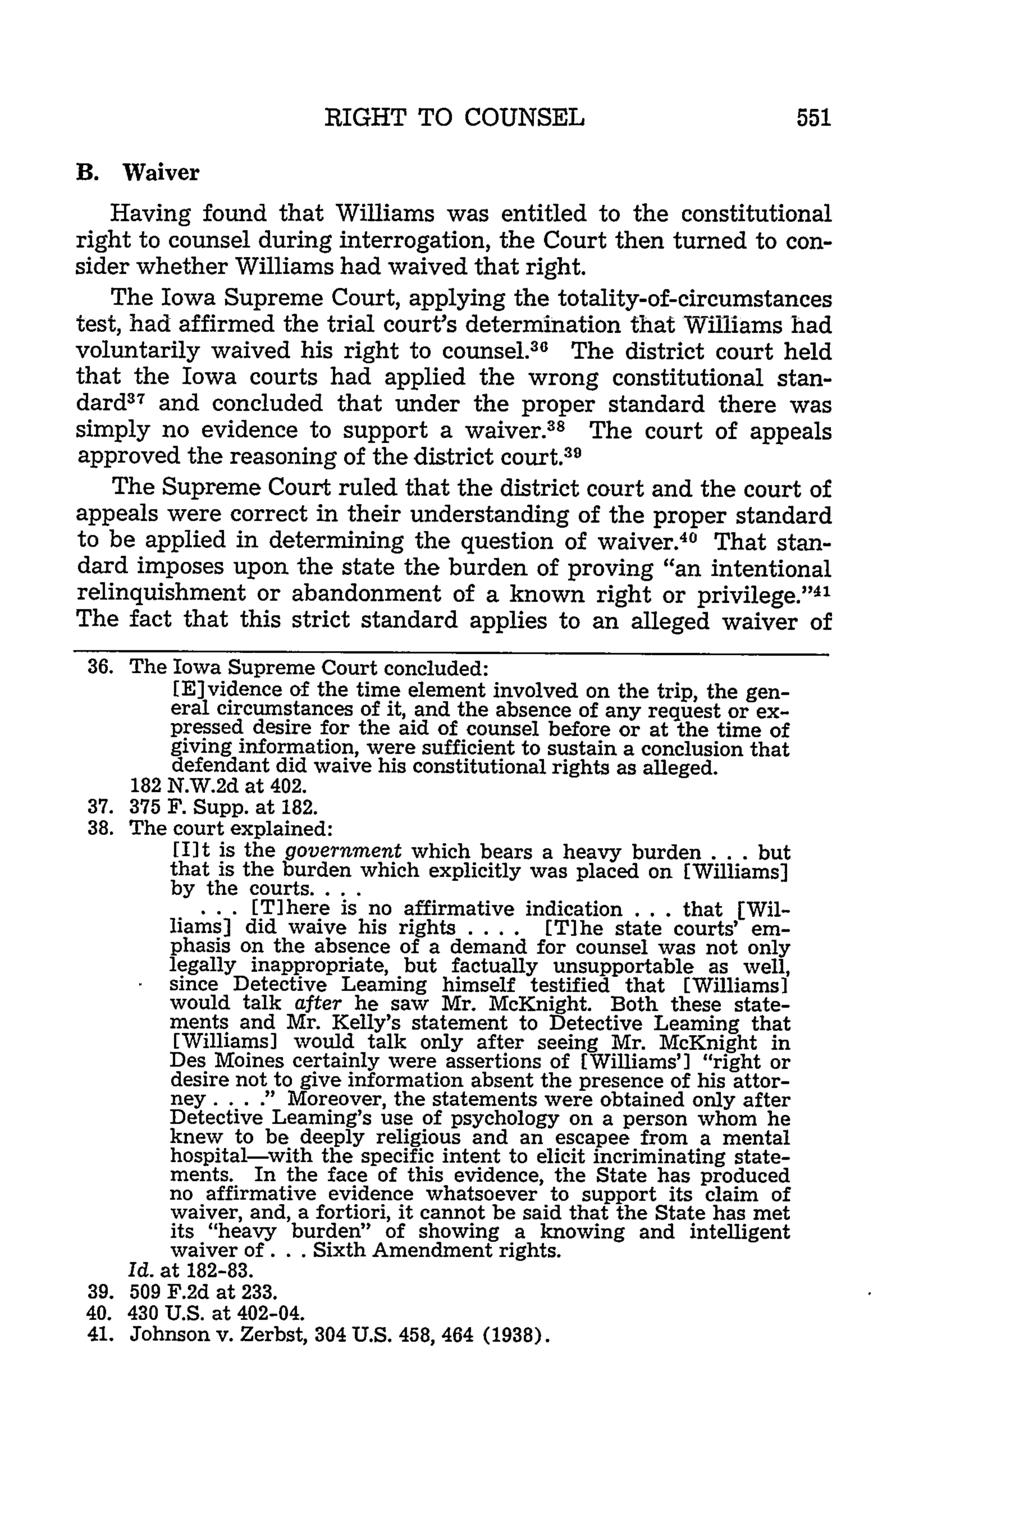 B. Waiver RIGHT TO COUNSEL Having found that Williams was entitled to the constitutional right to counsel during interrogation, the Court then turned to consider whether Williams had waived that